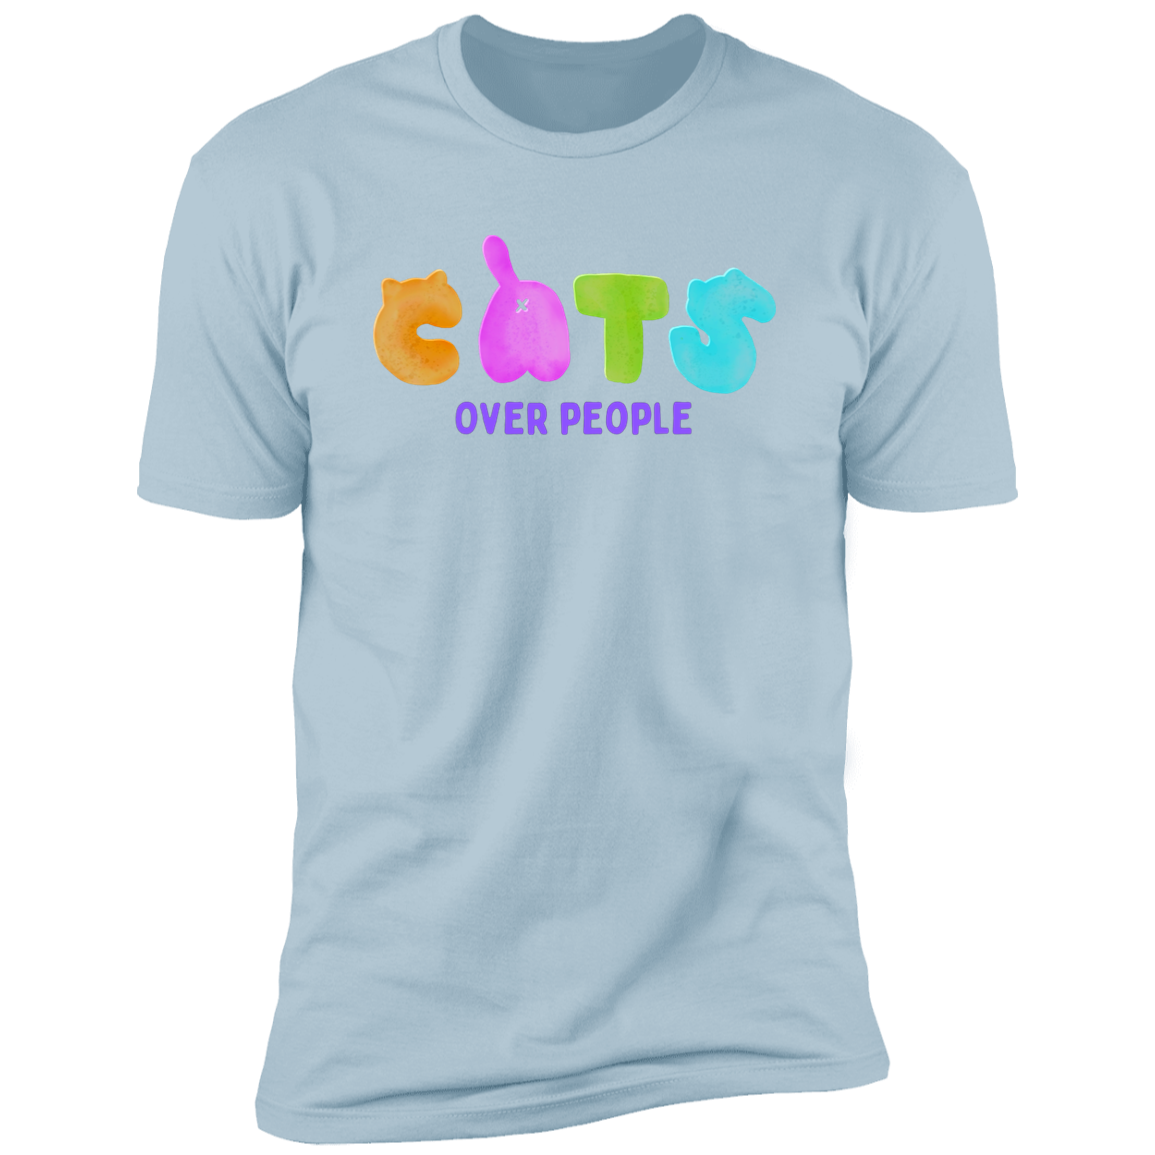 Cats Over People T-shirt, Cat Shirt for humans, in light blue